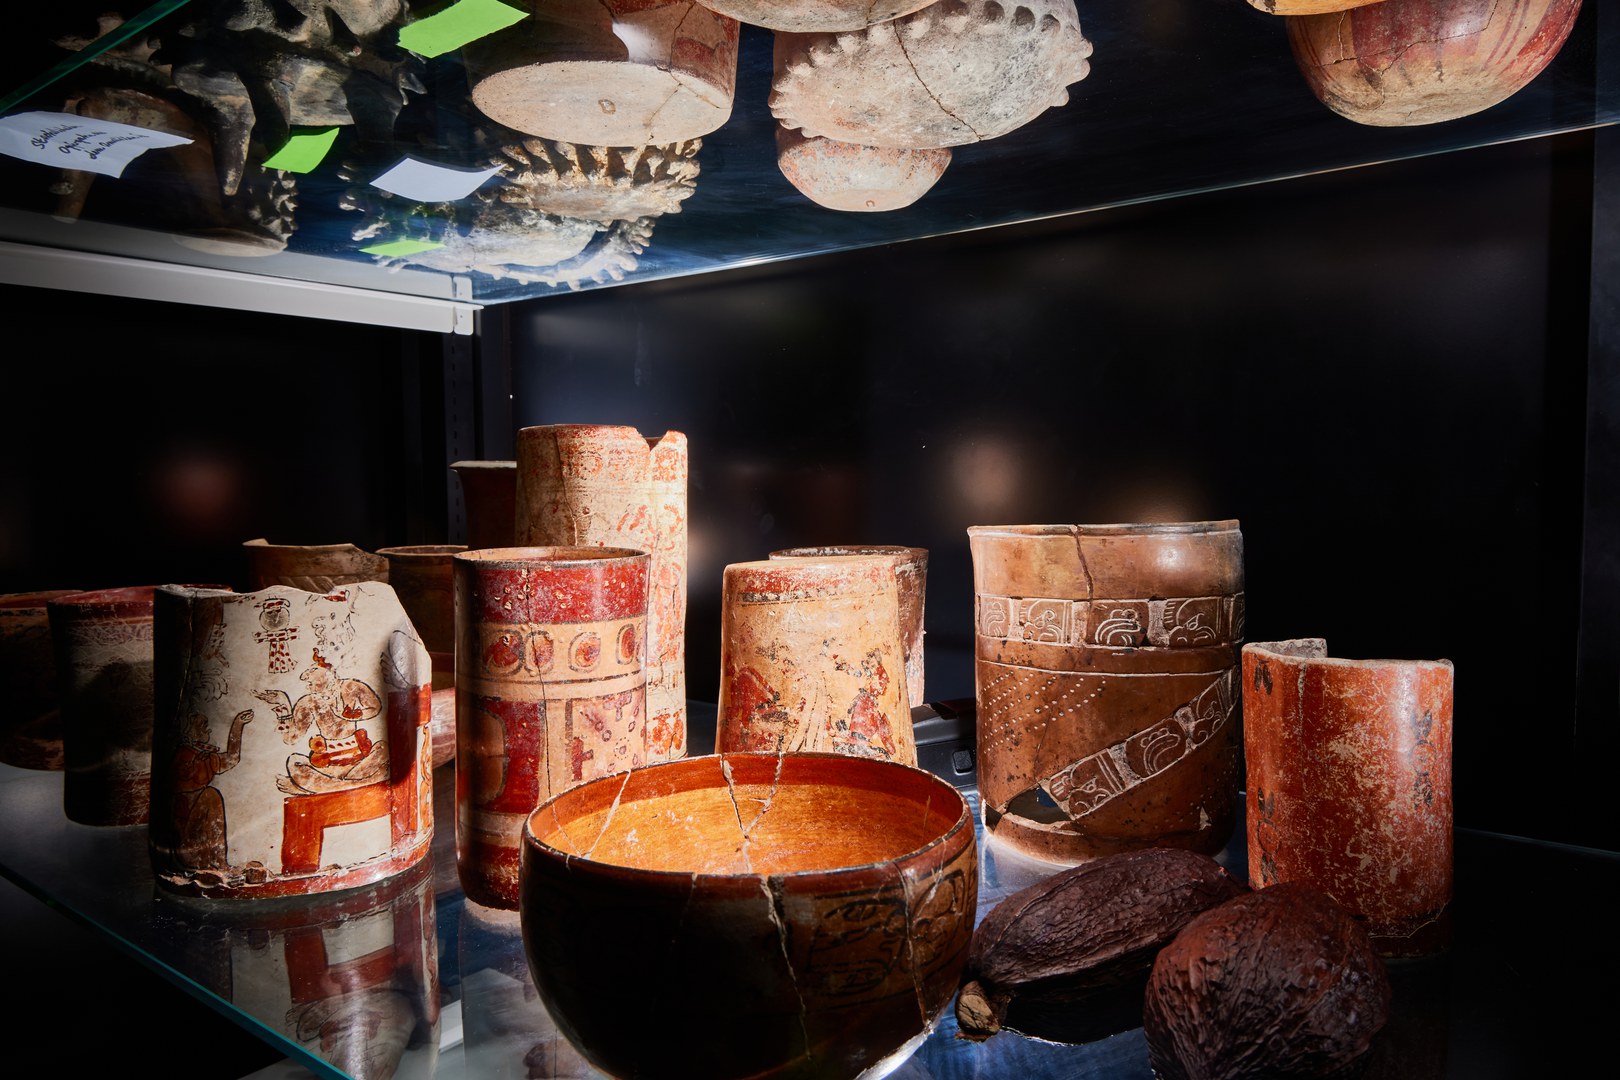 The Bonn Collection of the Americas contains various objects from Maya culture.